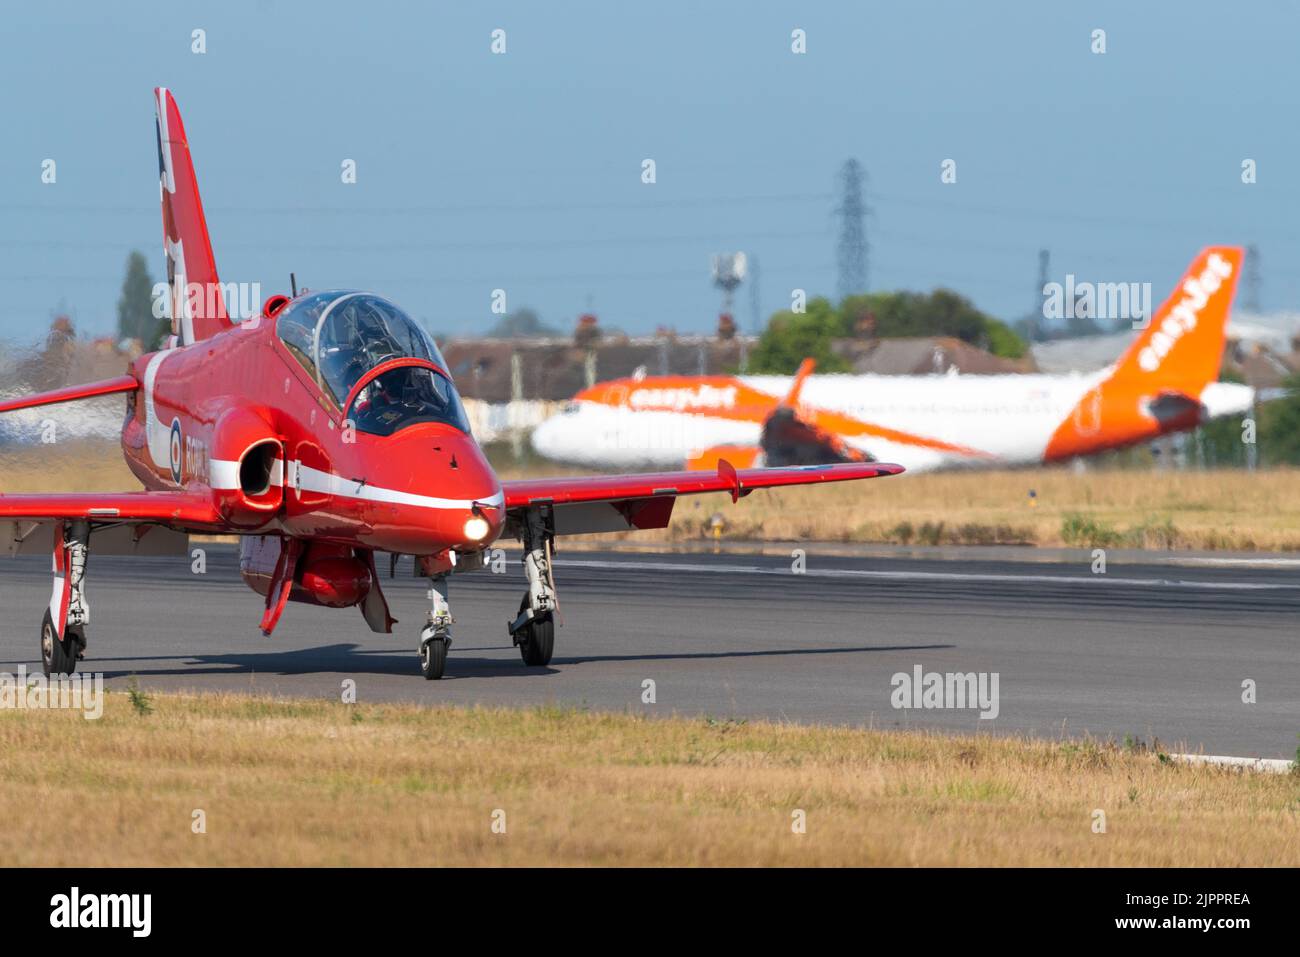 Royal Air Force Red Arrows display team BAe Hawk T.1 jet plane after landing at London Southend Airport for weekend of airshows. easyJet holding Stock Photo